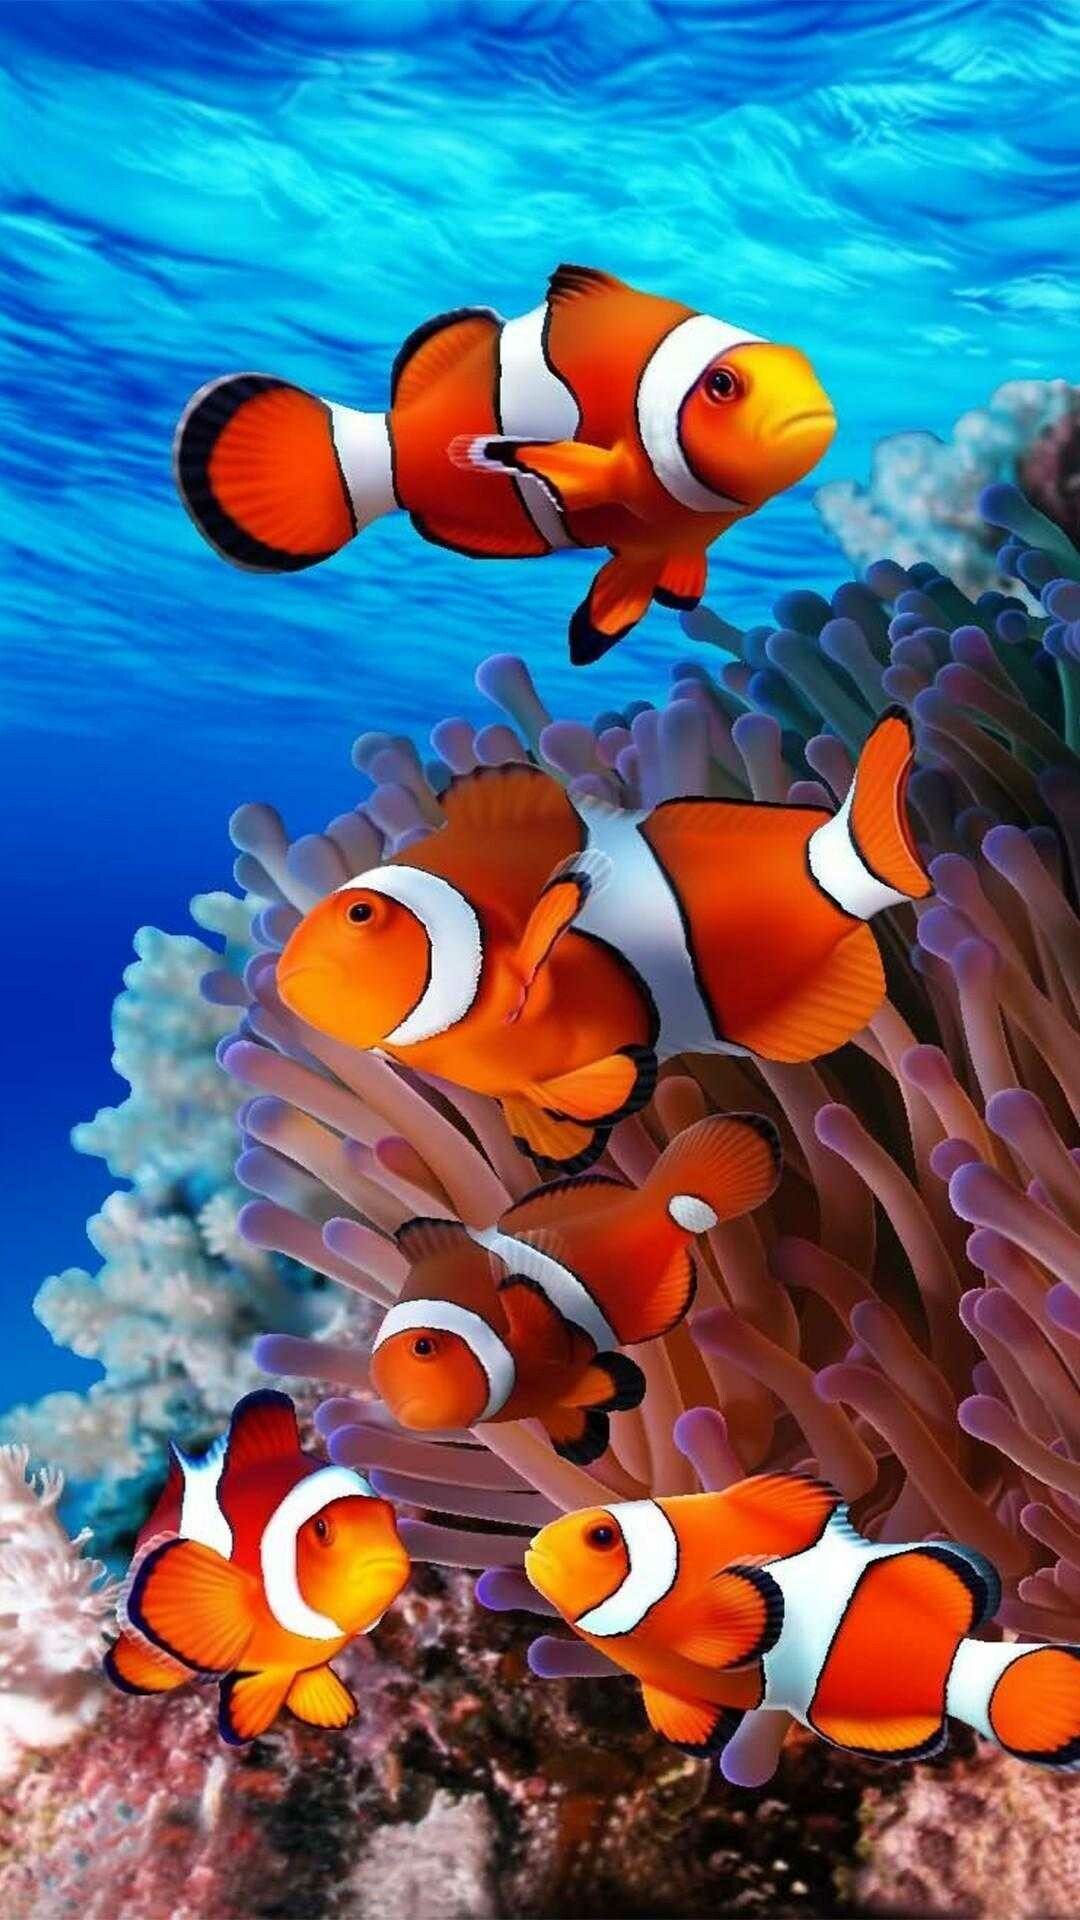 iPhone fish wallpapers, Stunning aquatic imagery, Oceanic inspiration, Perfect for iOS devices, 1080x1920 Full HD Phone